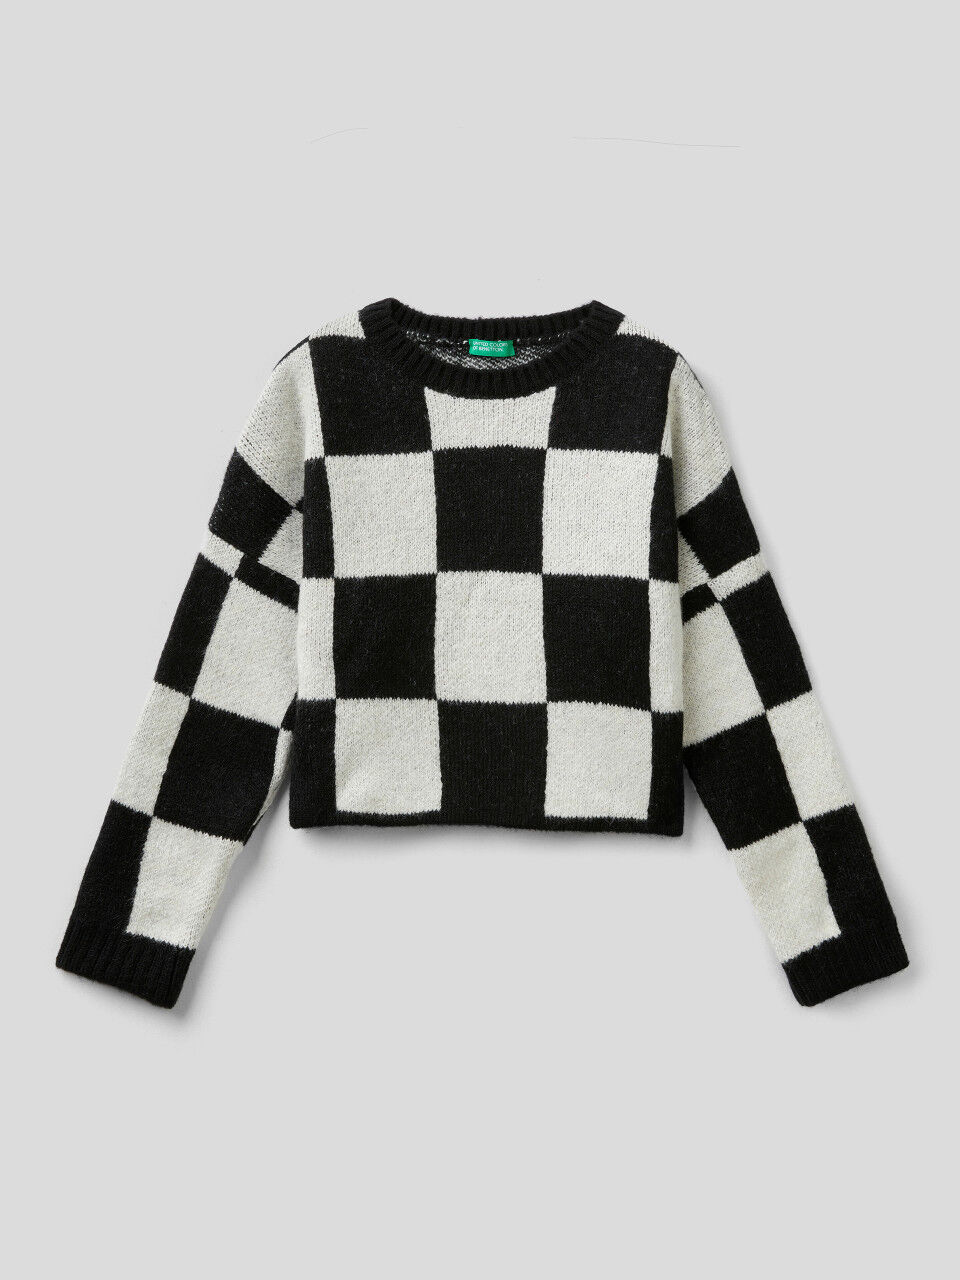 Two-tone check sweater